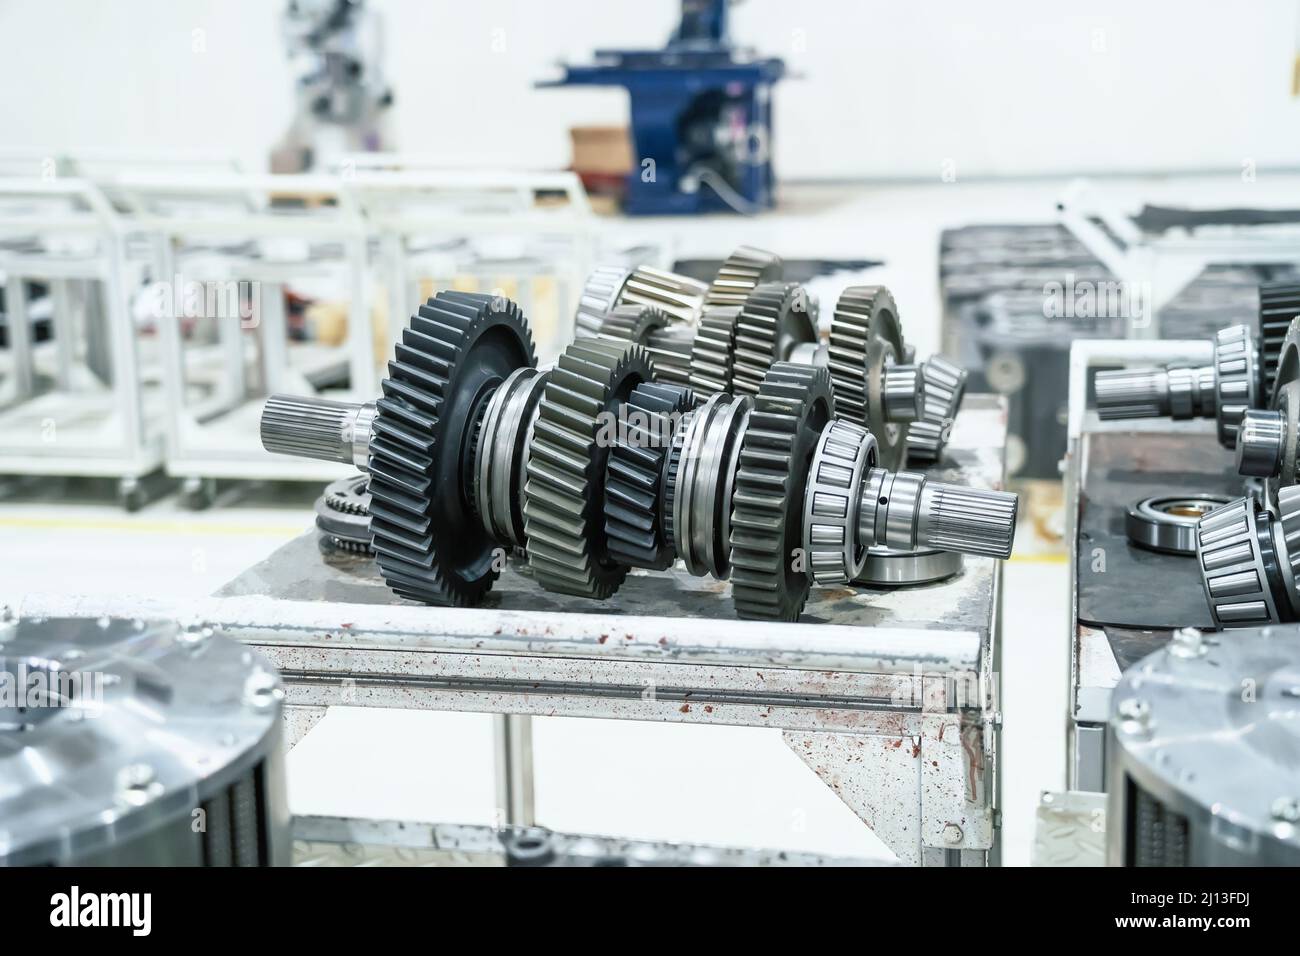 Part of gearshift transmission with gear wheels of industrial machine in combine harvester factory. Stock Photo